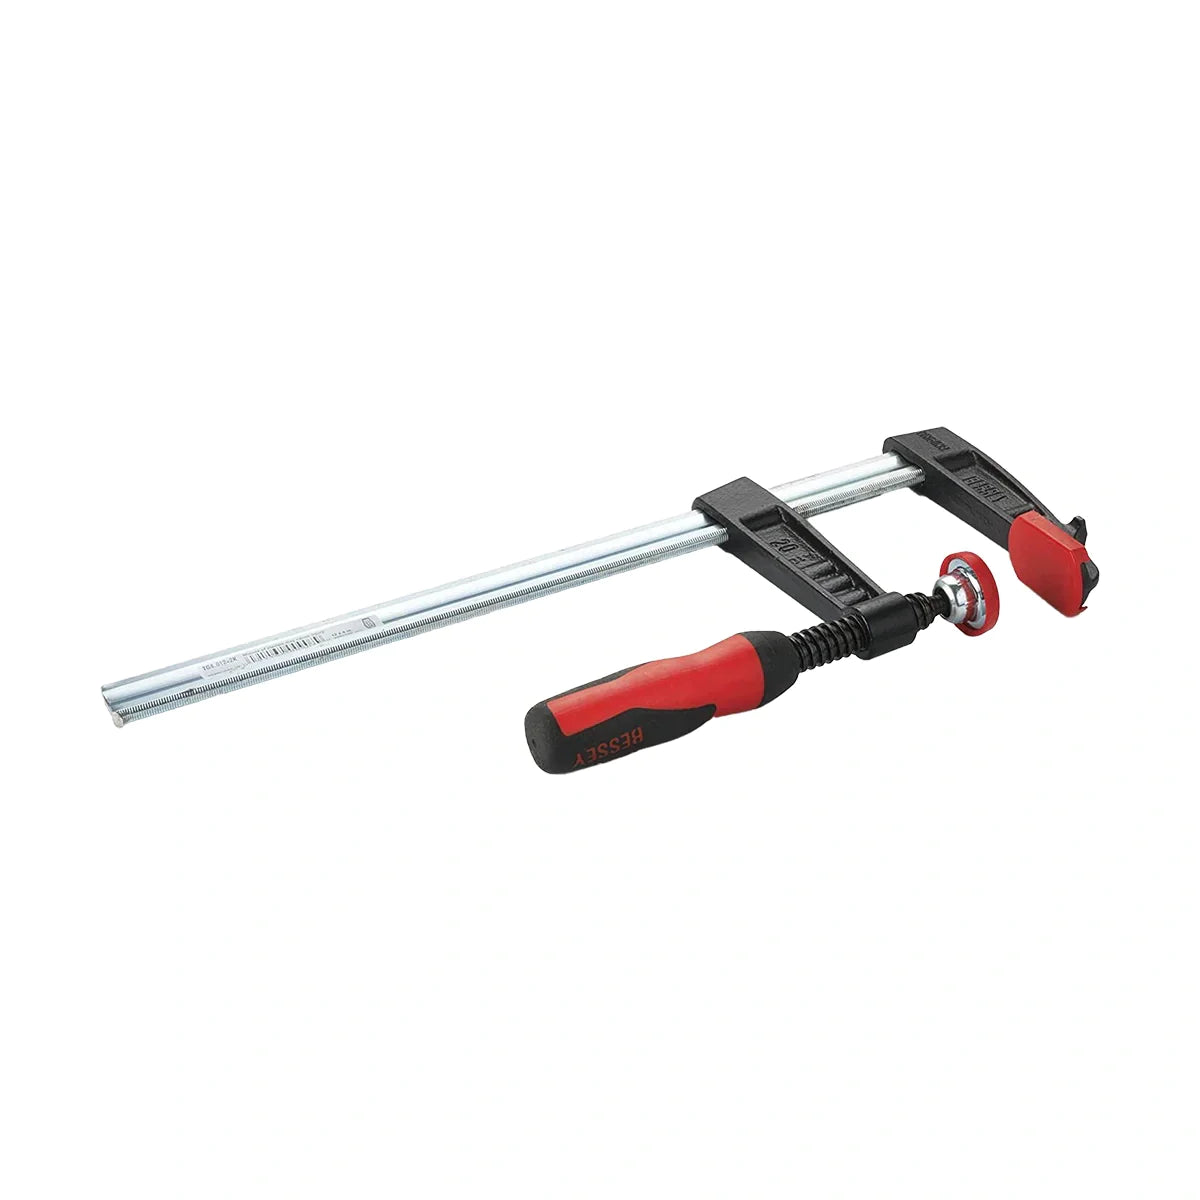 TGJ2 Series Cast Iron Bar Clamp with 2K Handle